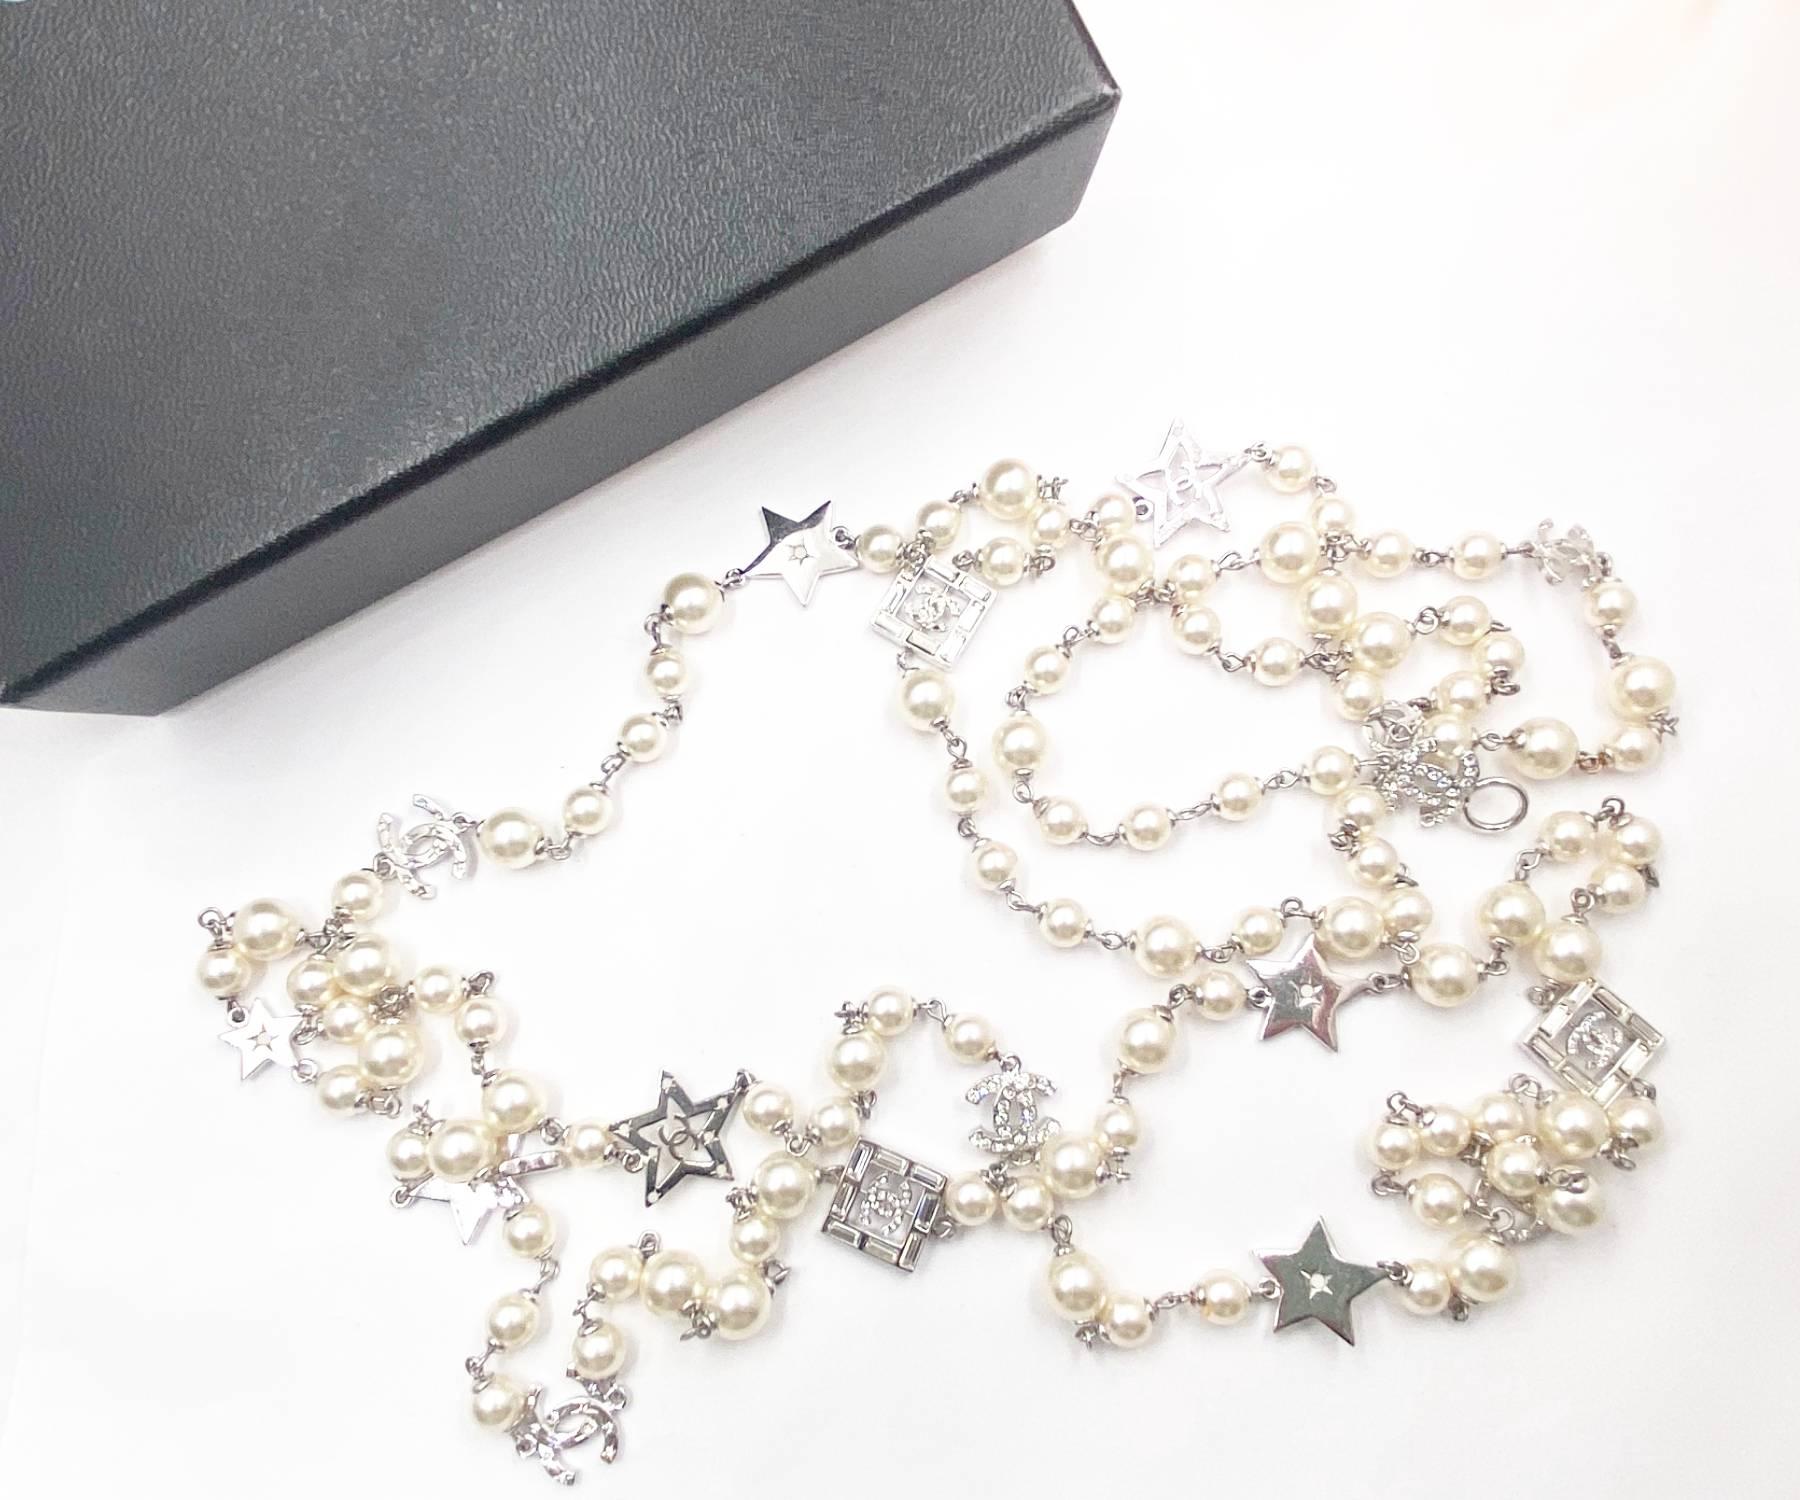 Chanel Rare Silver CC Star Crystal Faux Pearl 188cm Long Necklace

* Marked 06
* Made in France
* Comes with the original box

– It's approximately 188 cm long.
– The largest pendant is approximately 2.1 cm x 2.1cm.
– Very rare pierce
-In a very